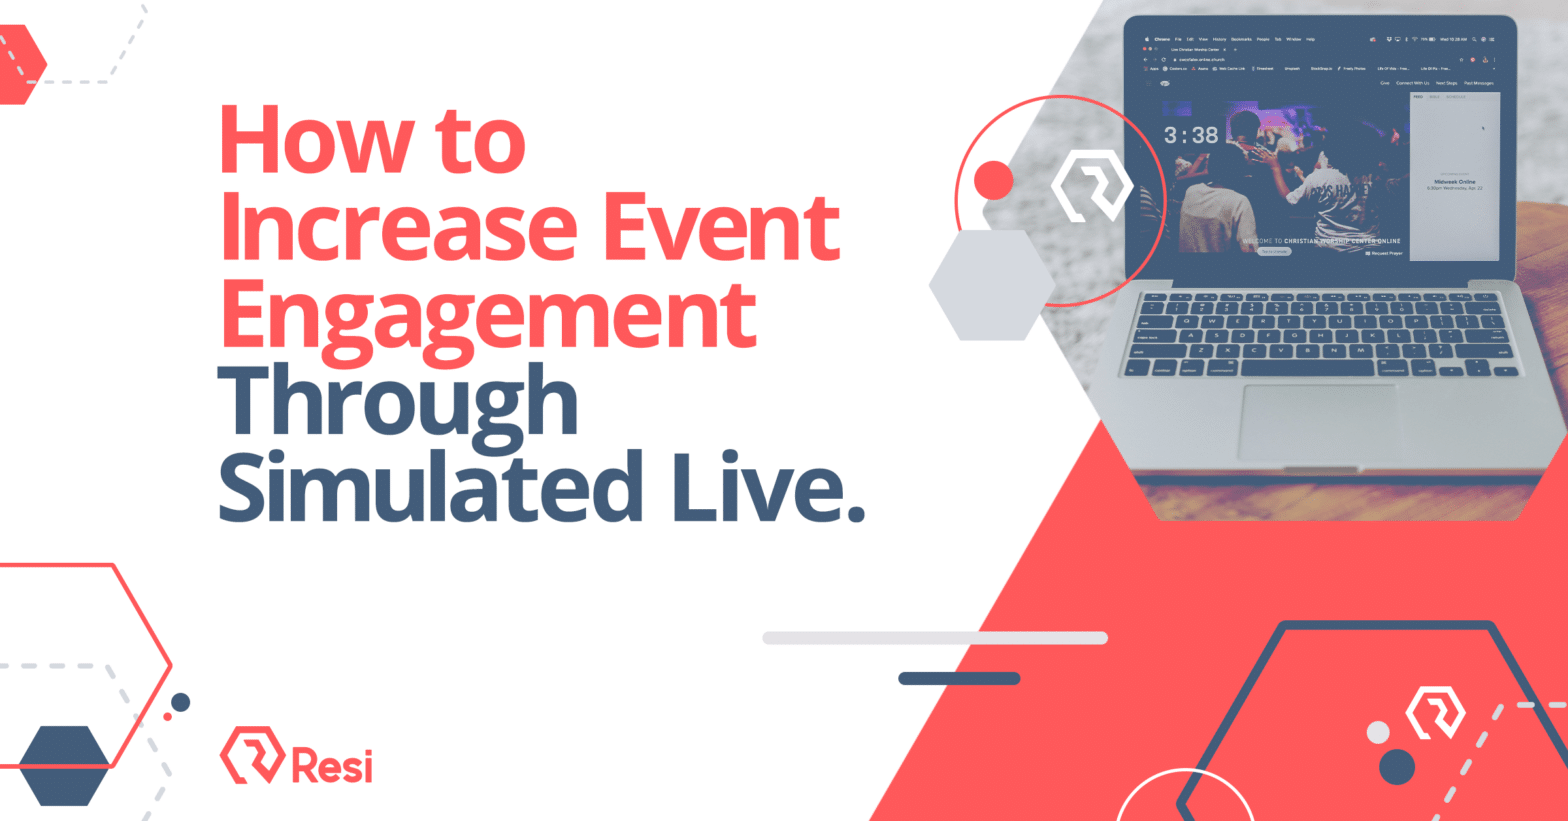 How To Increase Event Engagement Through Simulated Live